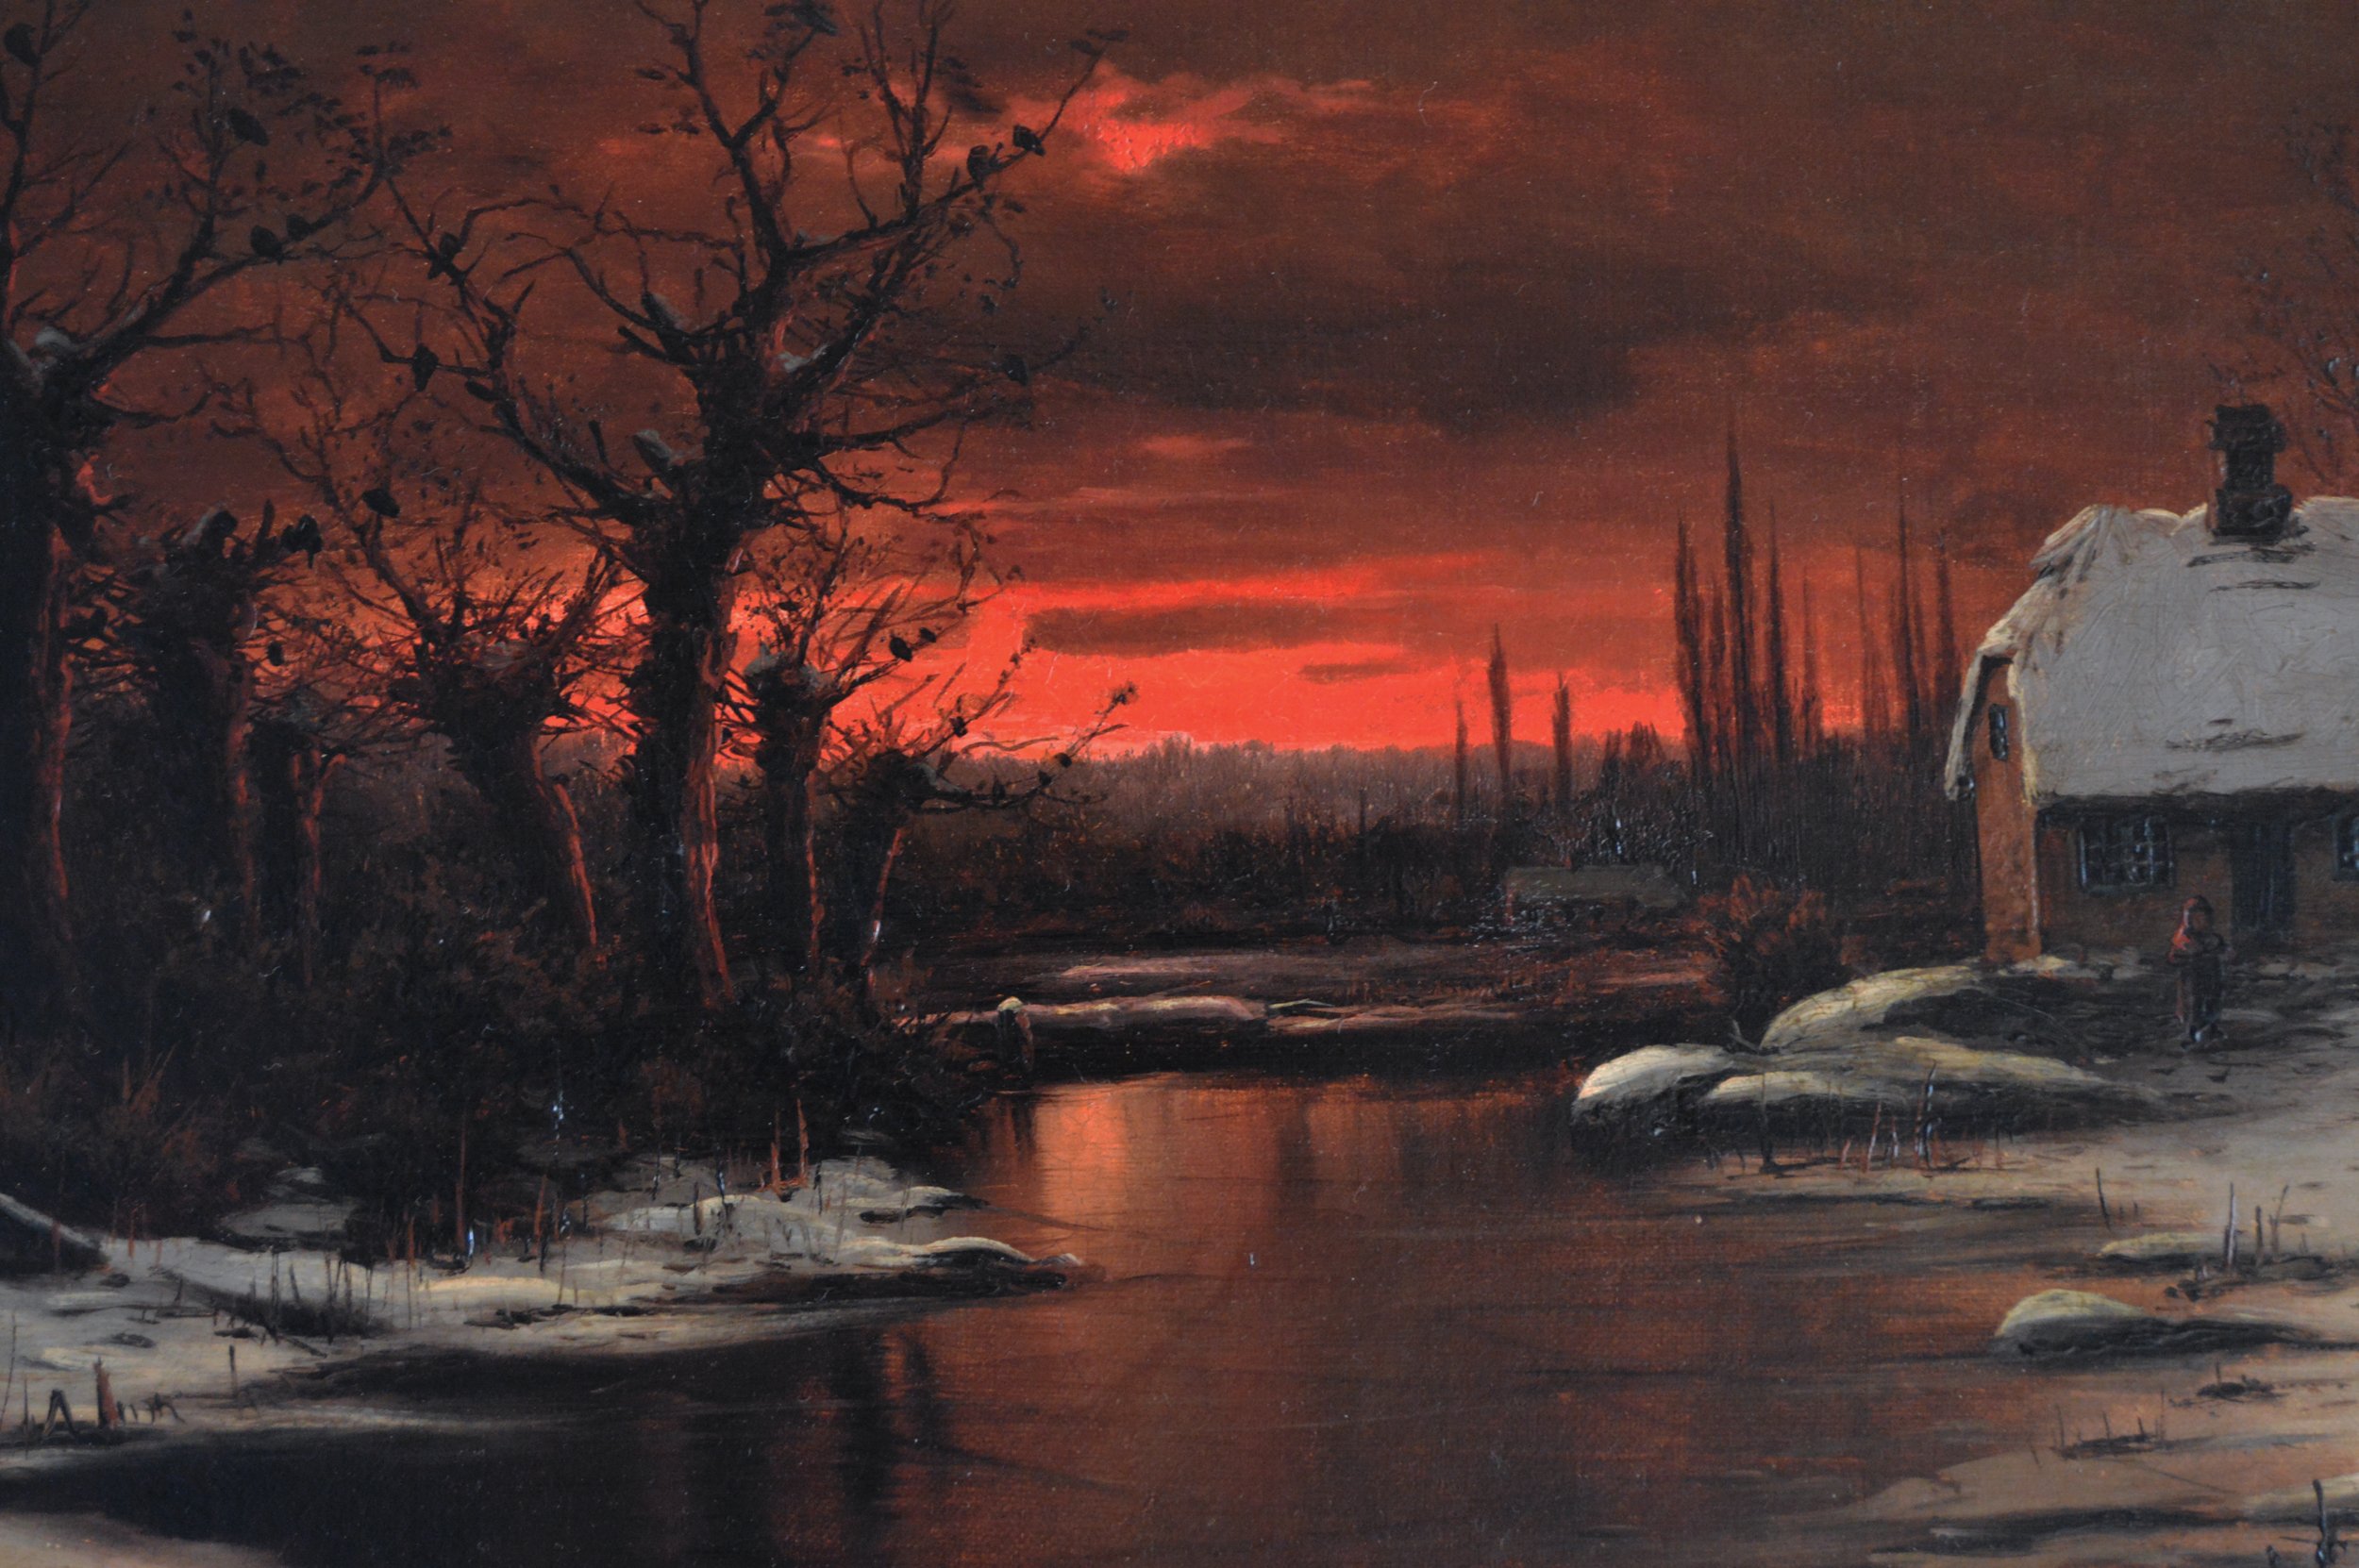 Nils H. Christiansen - Sunset in Winter, Painting For Sale at 1stdibs